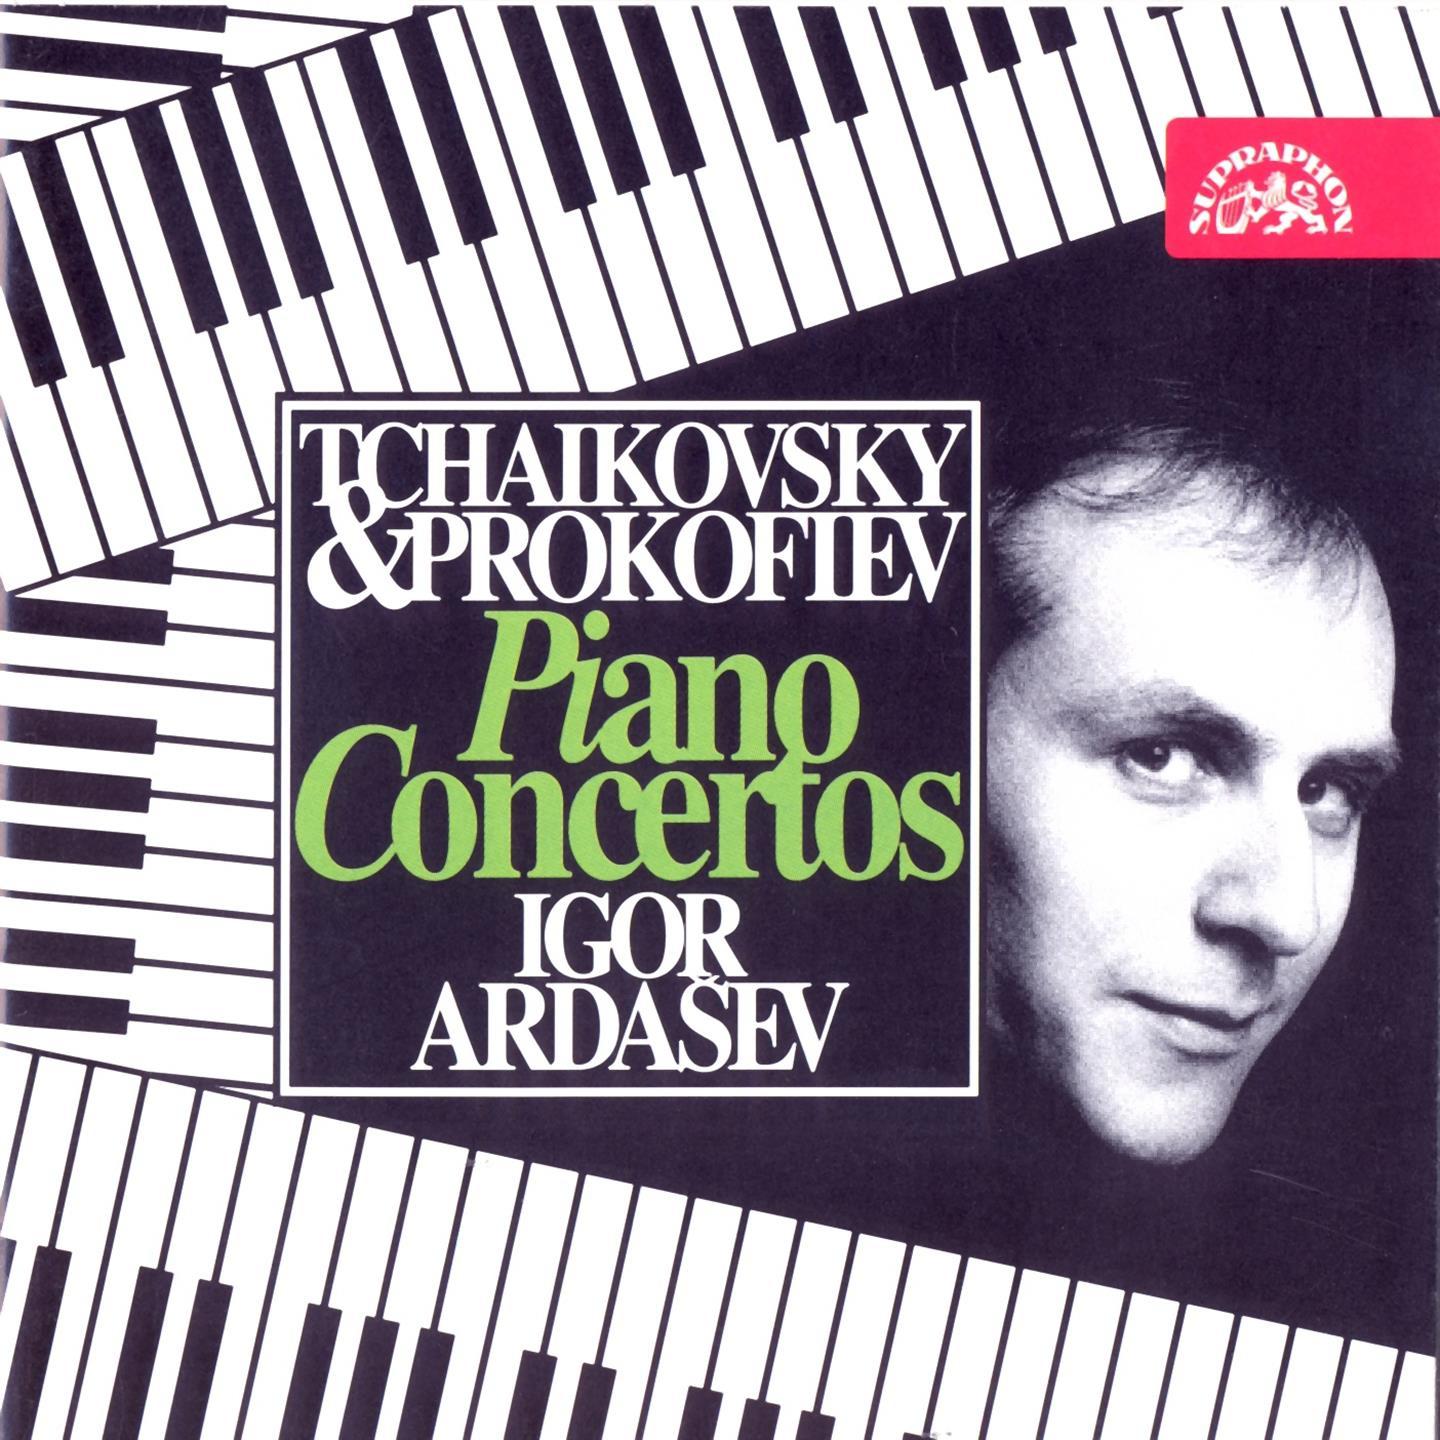 Concert Fantasia for Piano and Orchestra in G Major, Op. 56: II. Contrasts